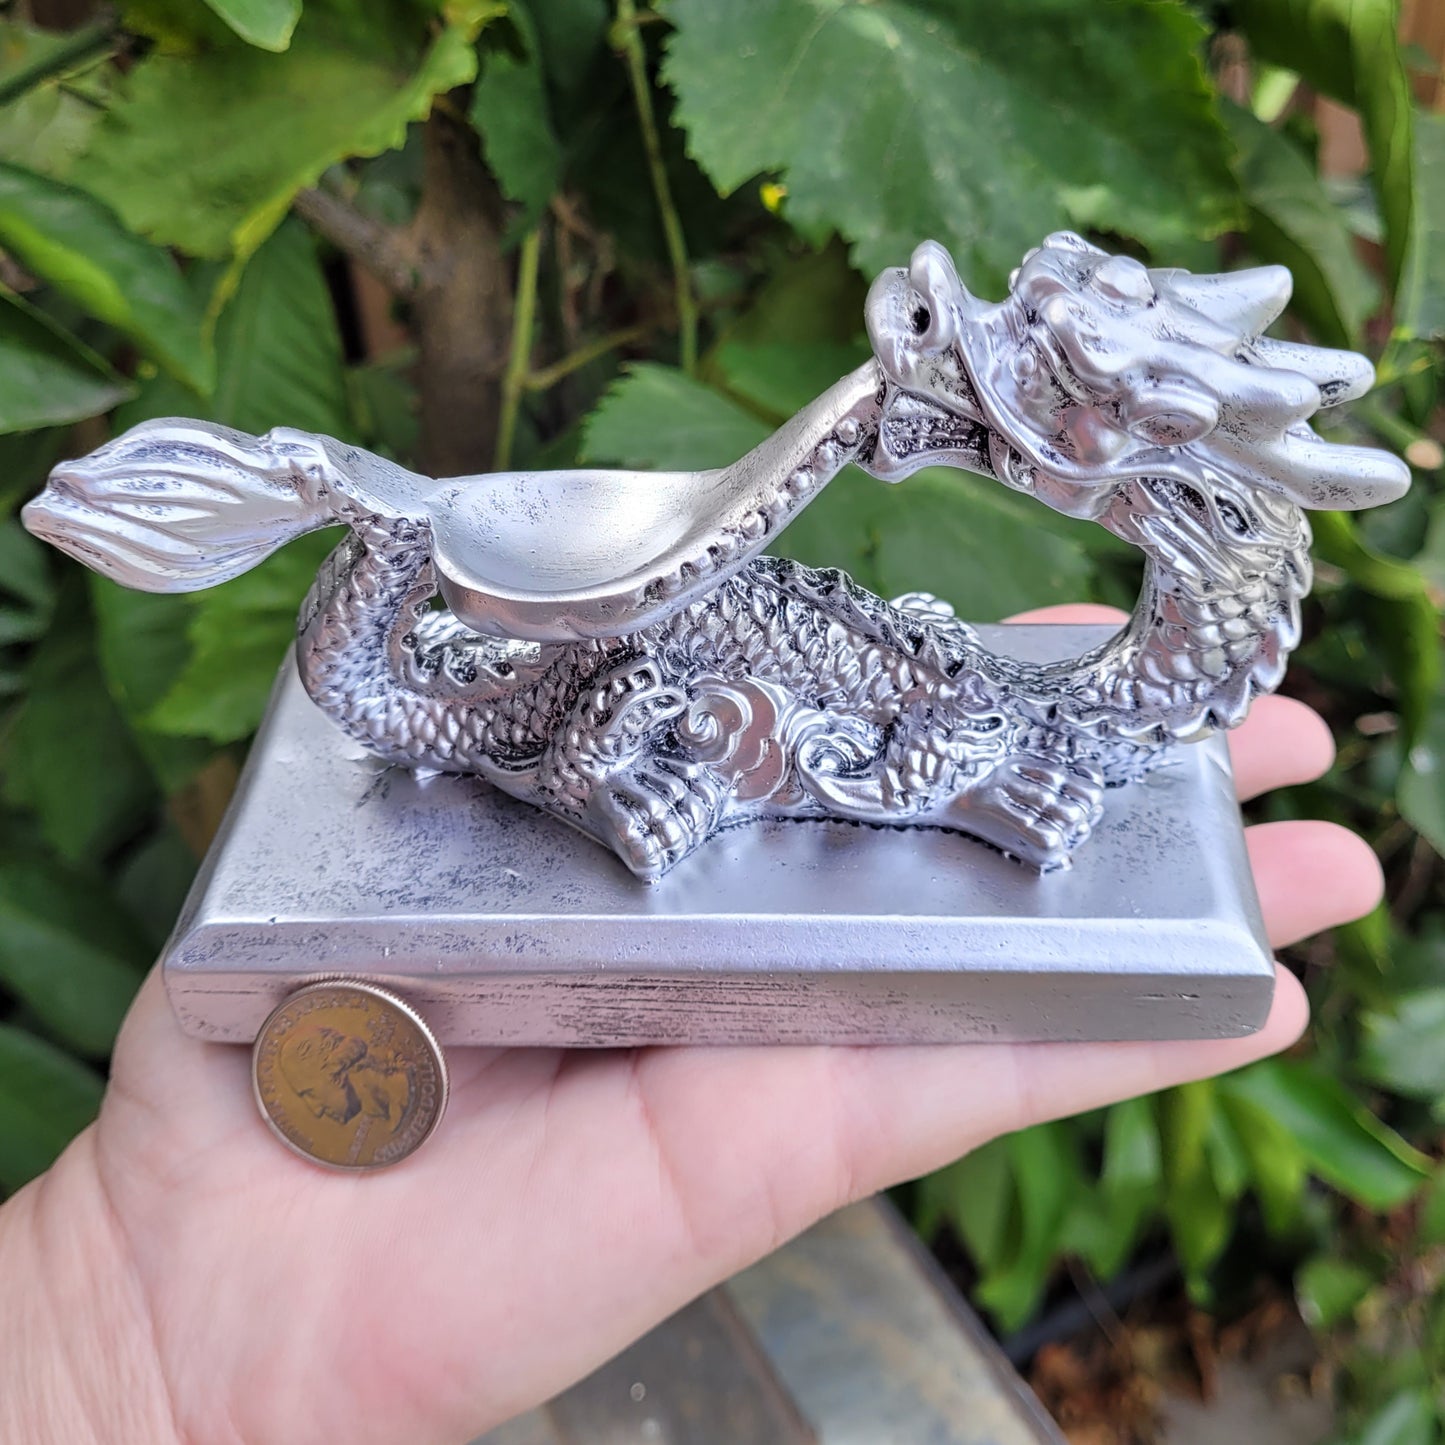 Dragon Sphere Display Stands in 3 Colors, for Crystal Balls or Eggs 1" to 2.7" (25mm to 68mm)